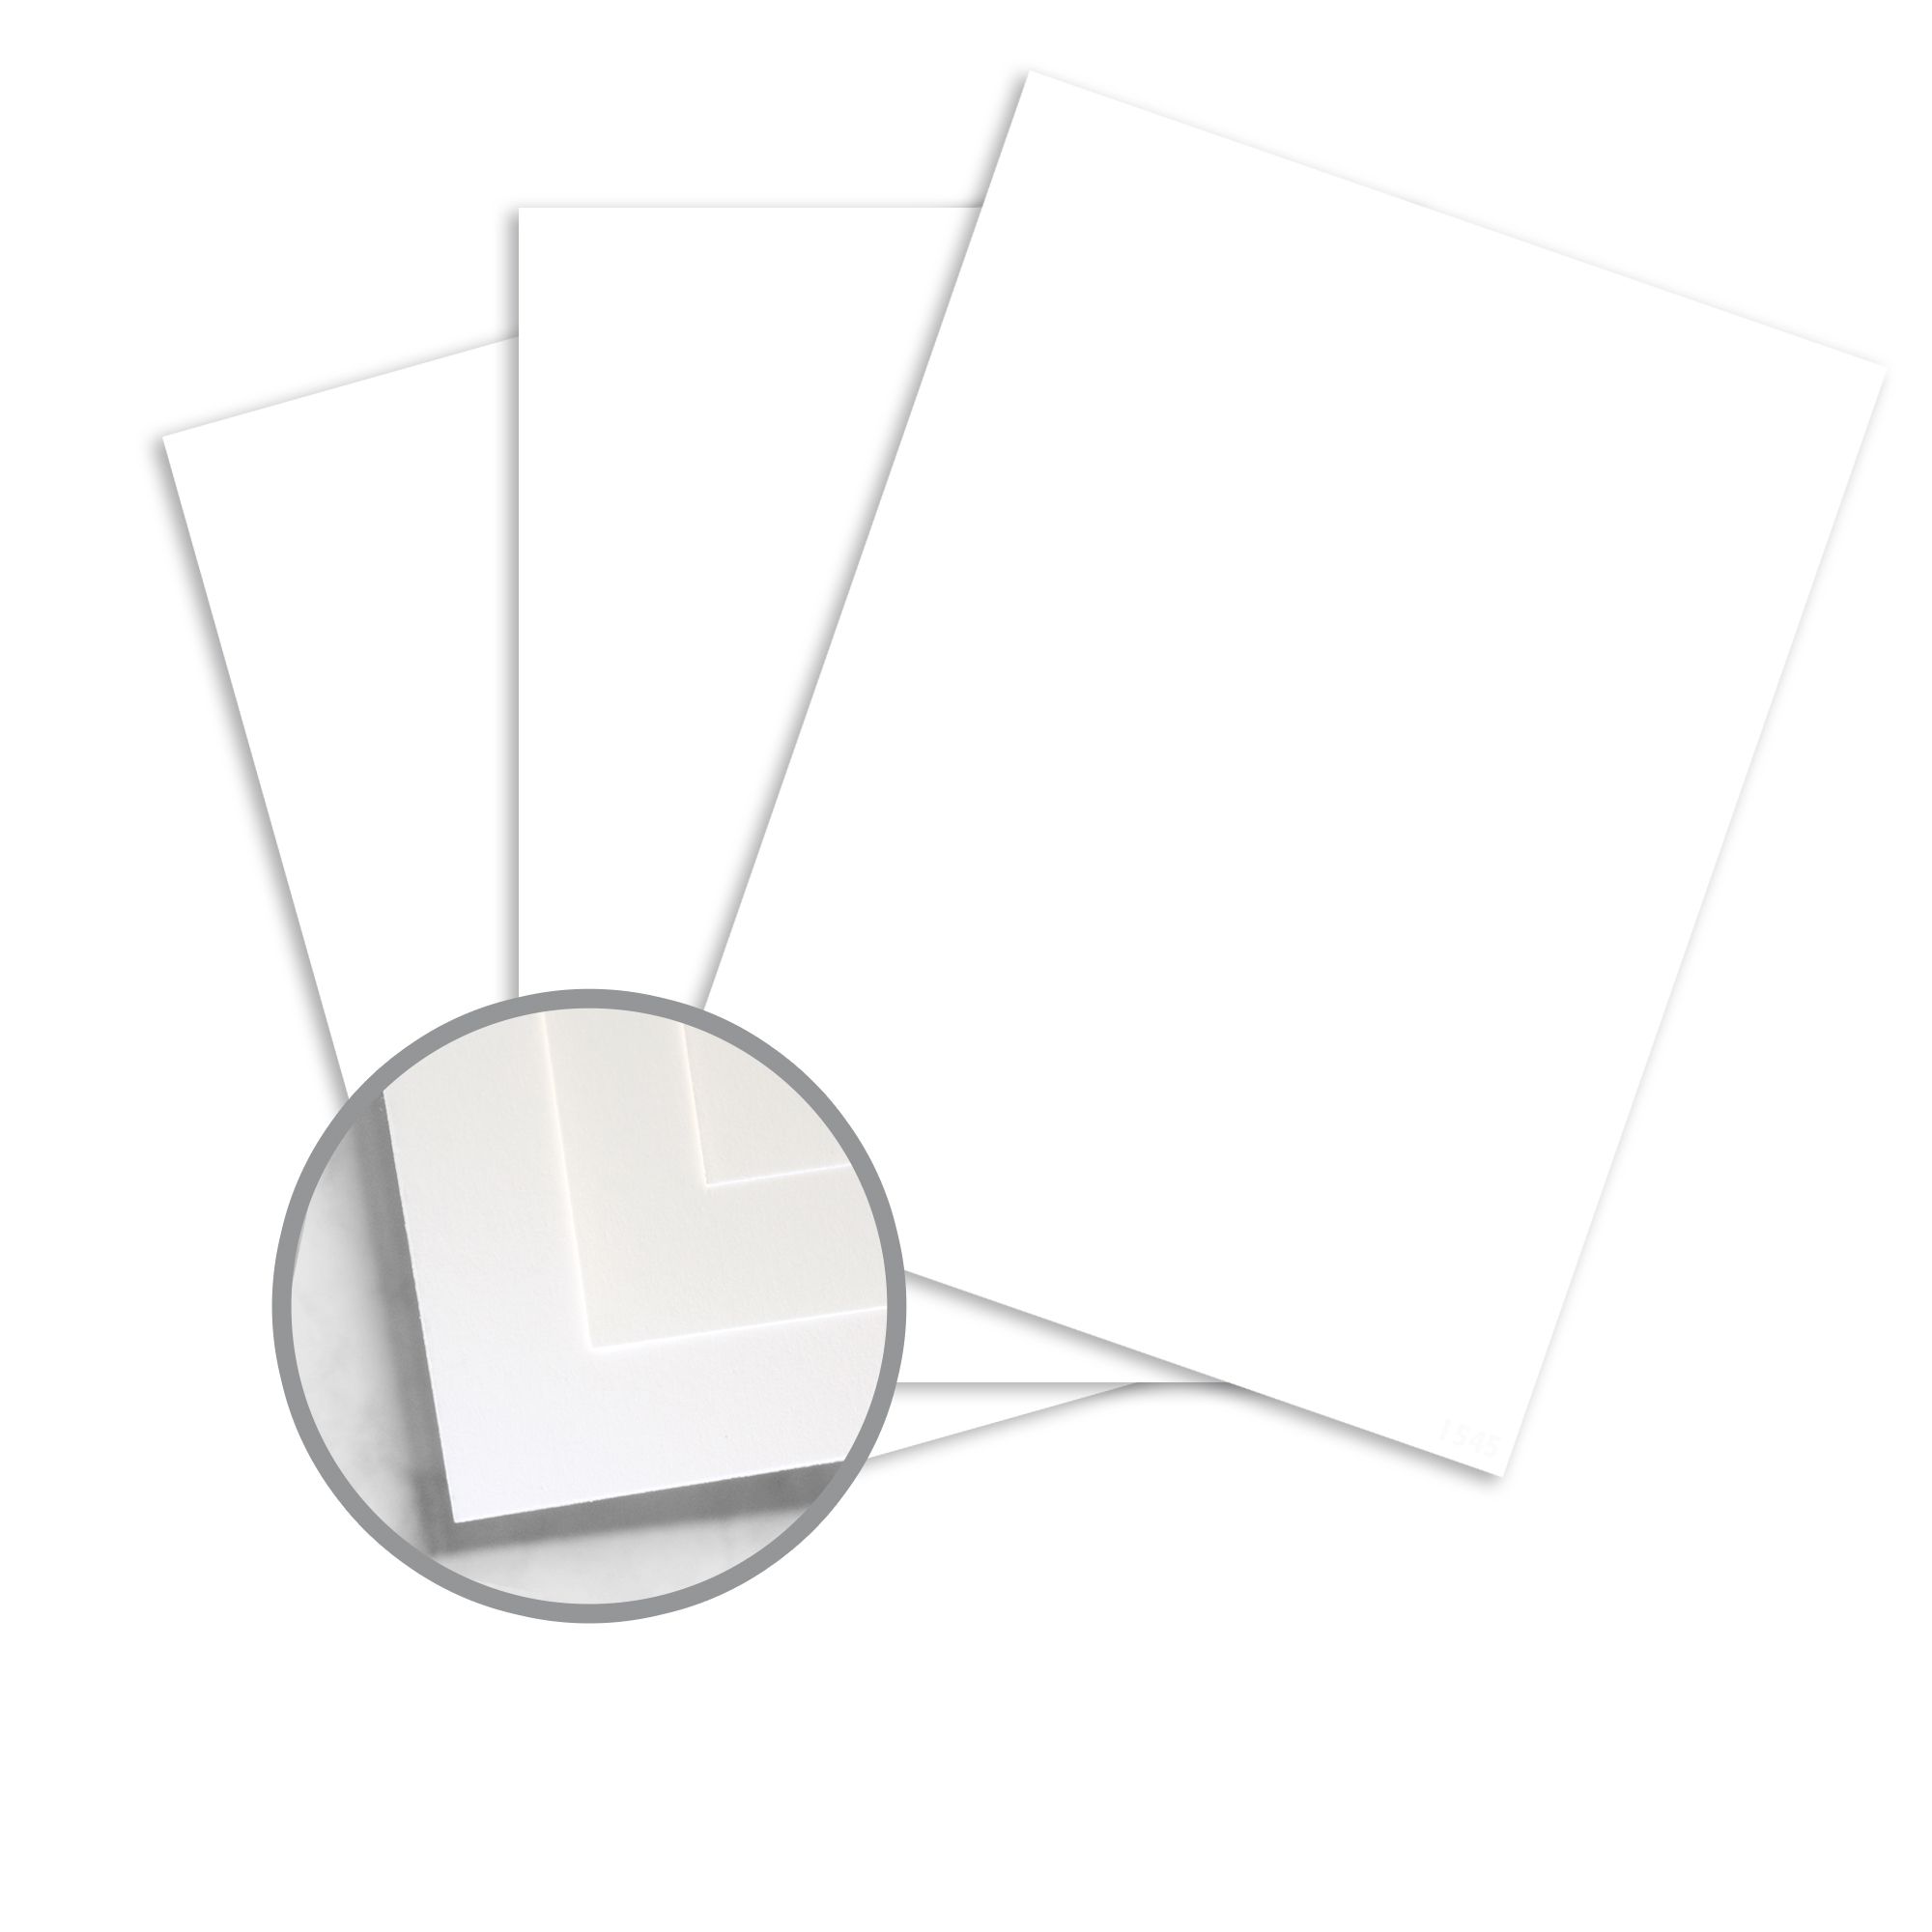 2xWhite Record Cards Lined with Headline 100 Cards per